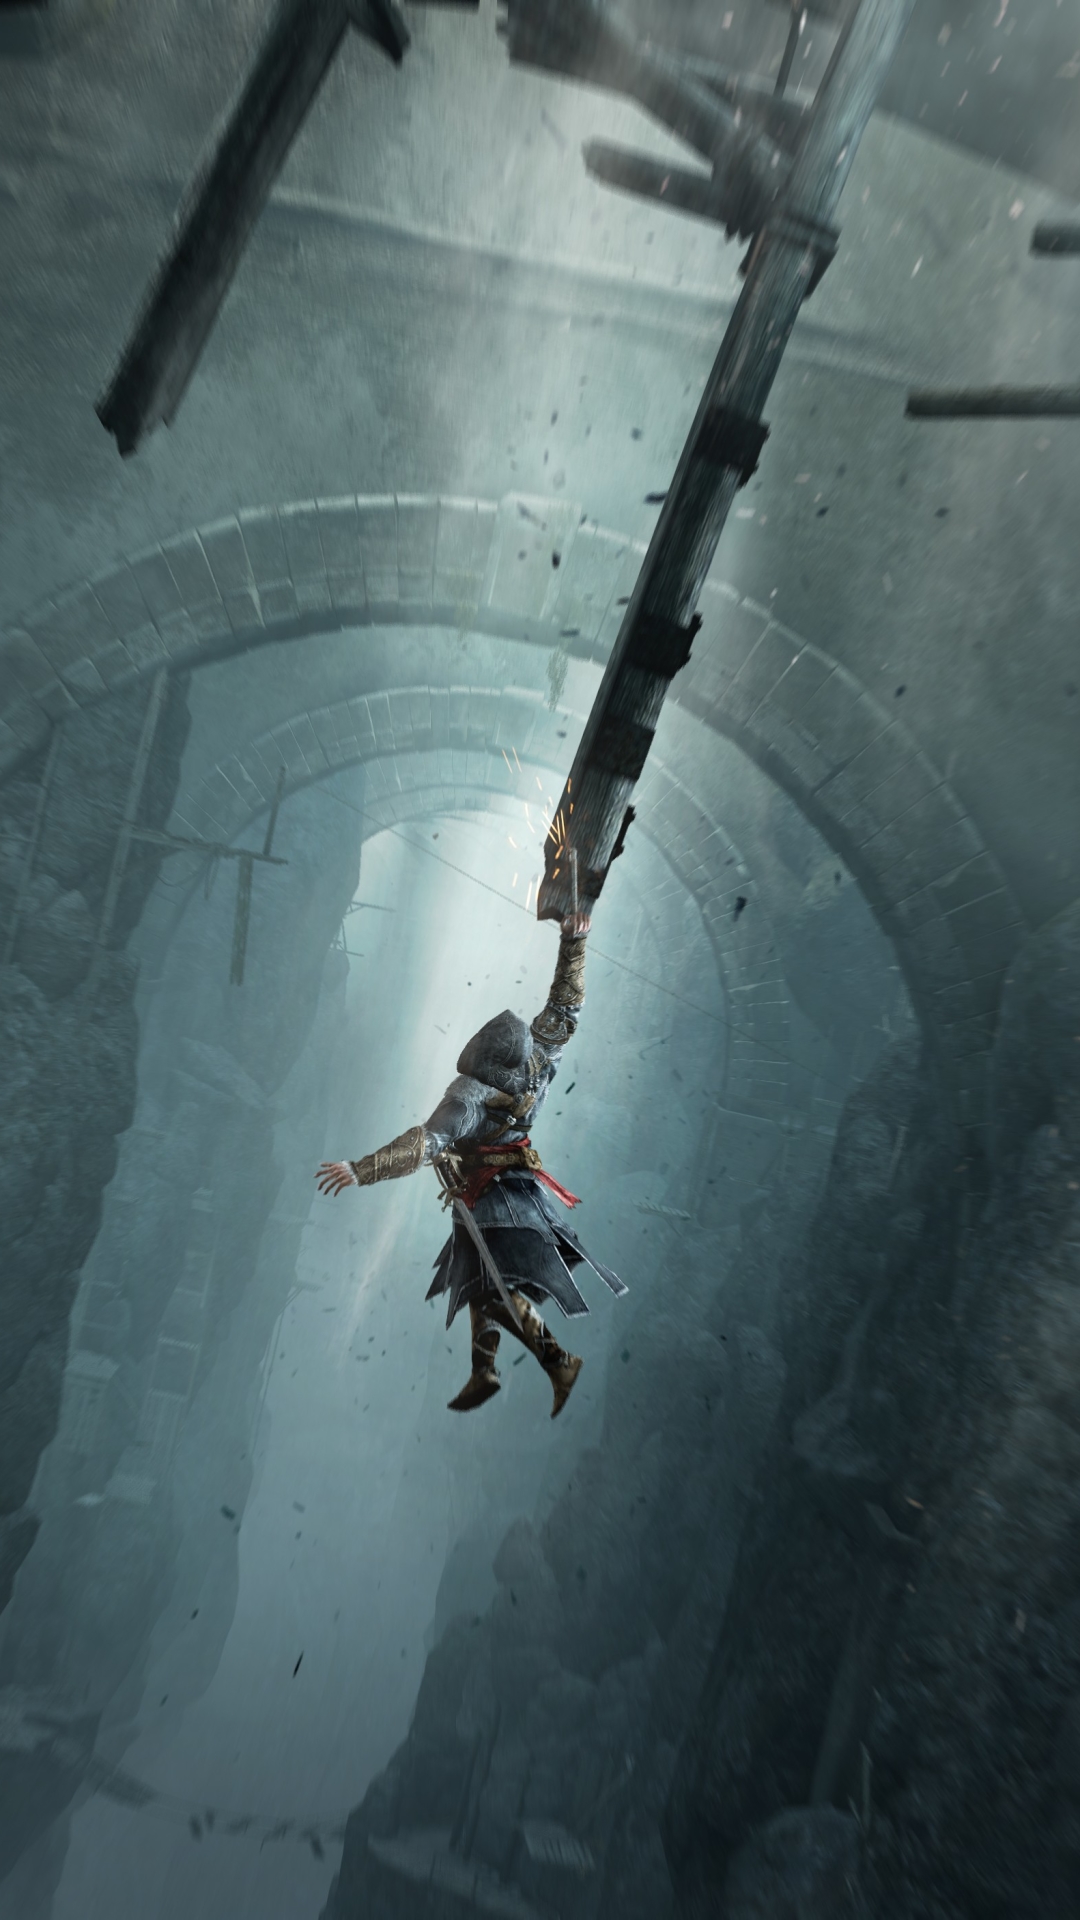 Assassin's Creed: Revelations Phone Wallpaper - Mobile Abyss